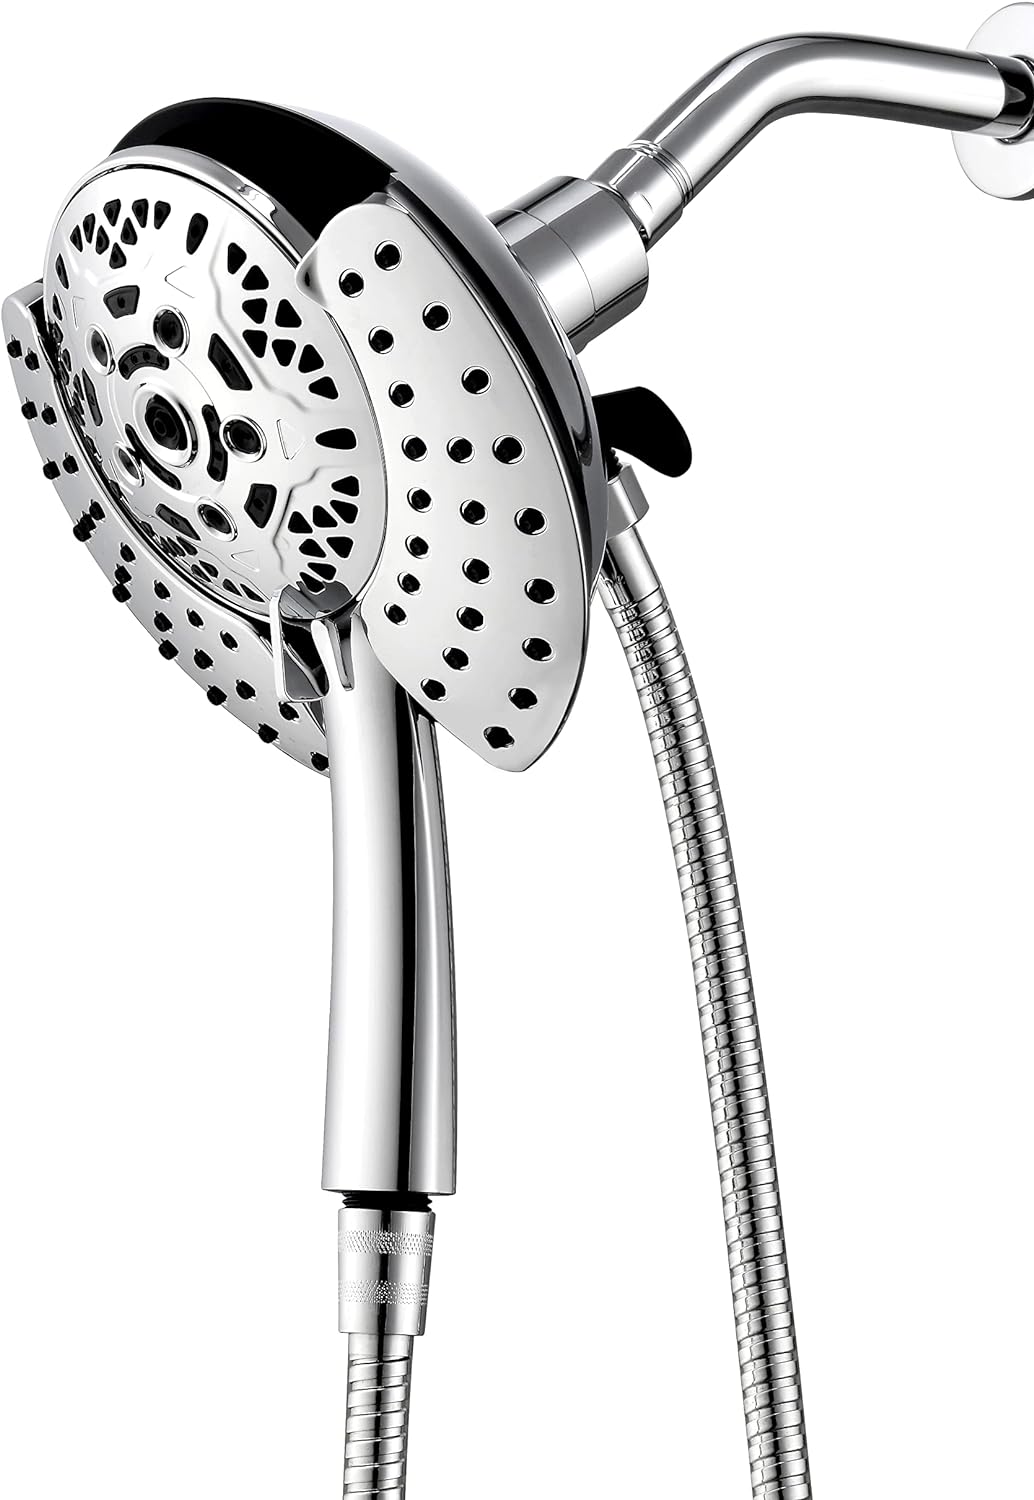 Shower Head with Handheld High Pressure: INAVAMZ Hand Held Shower Head & Rain Shower Head 2-IN-1 Shower Head with 59 Rotatable Stainless Steel Hose, Meet cUPC and CEC Certification